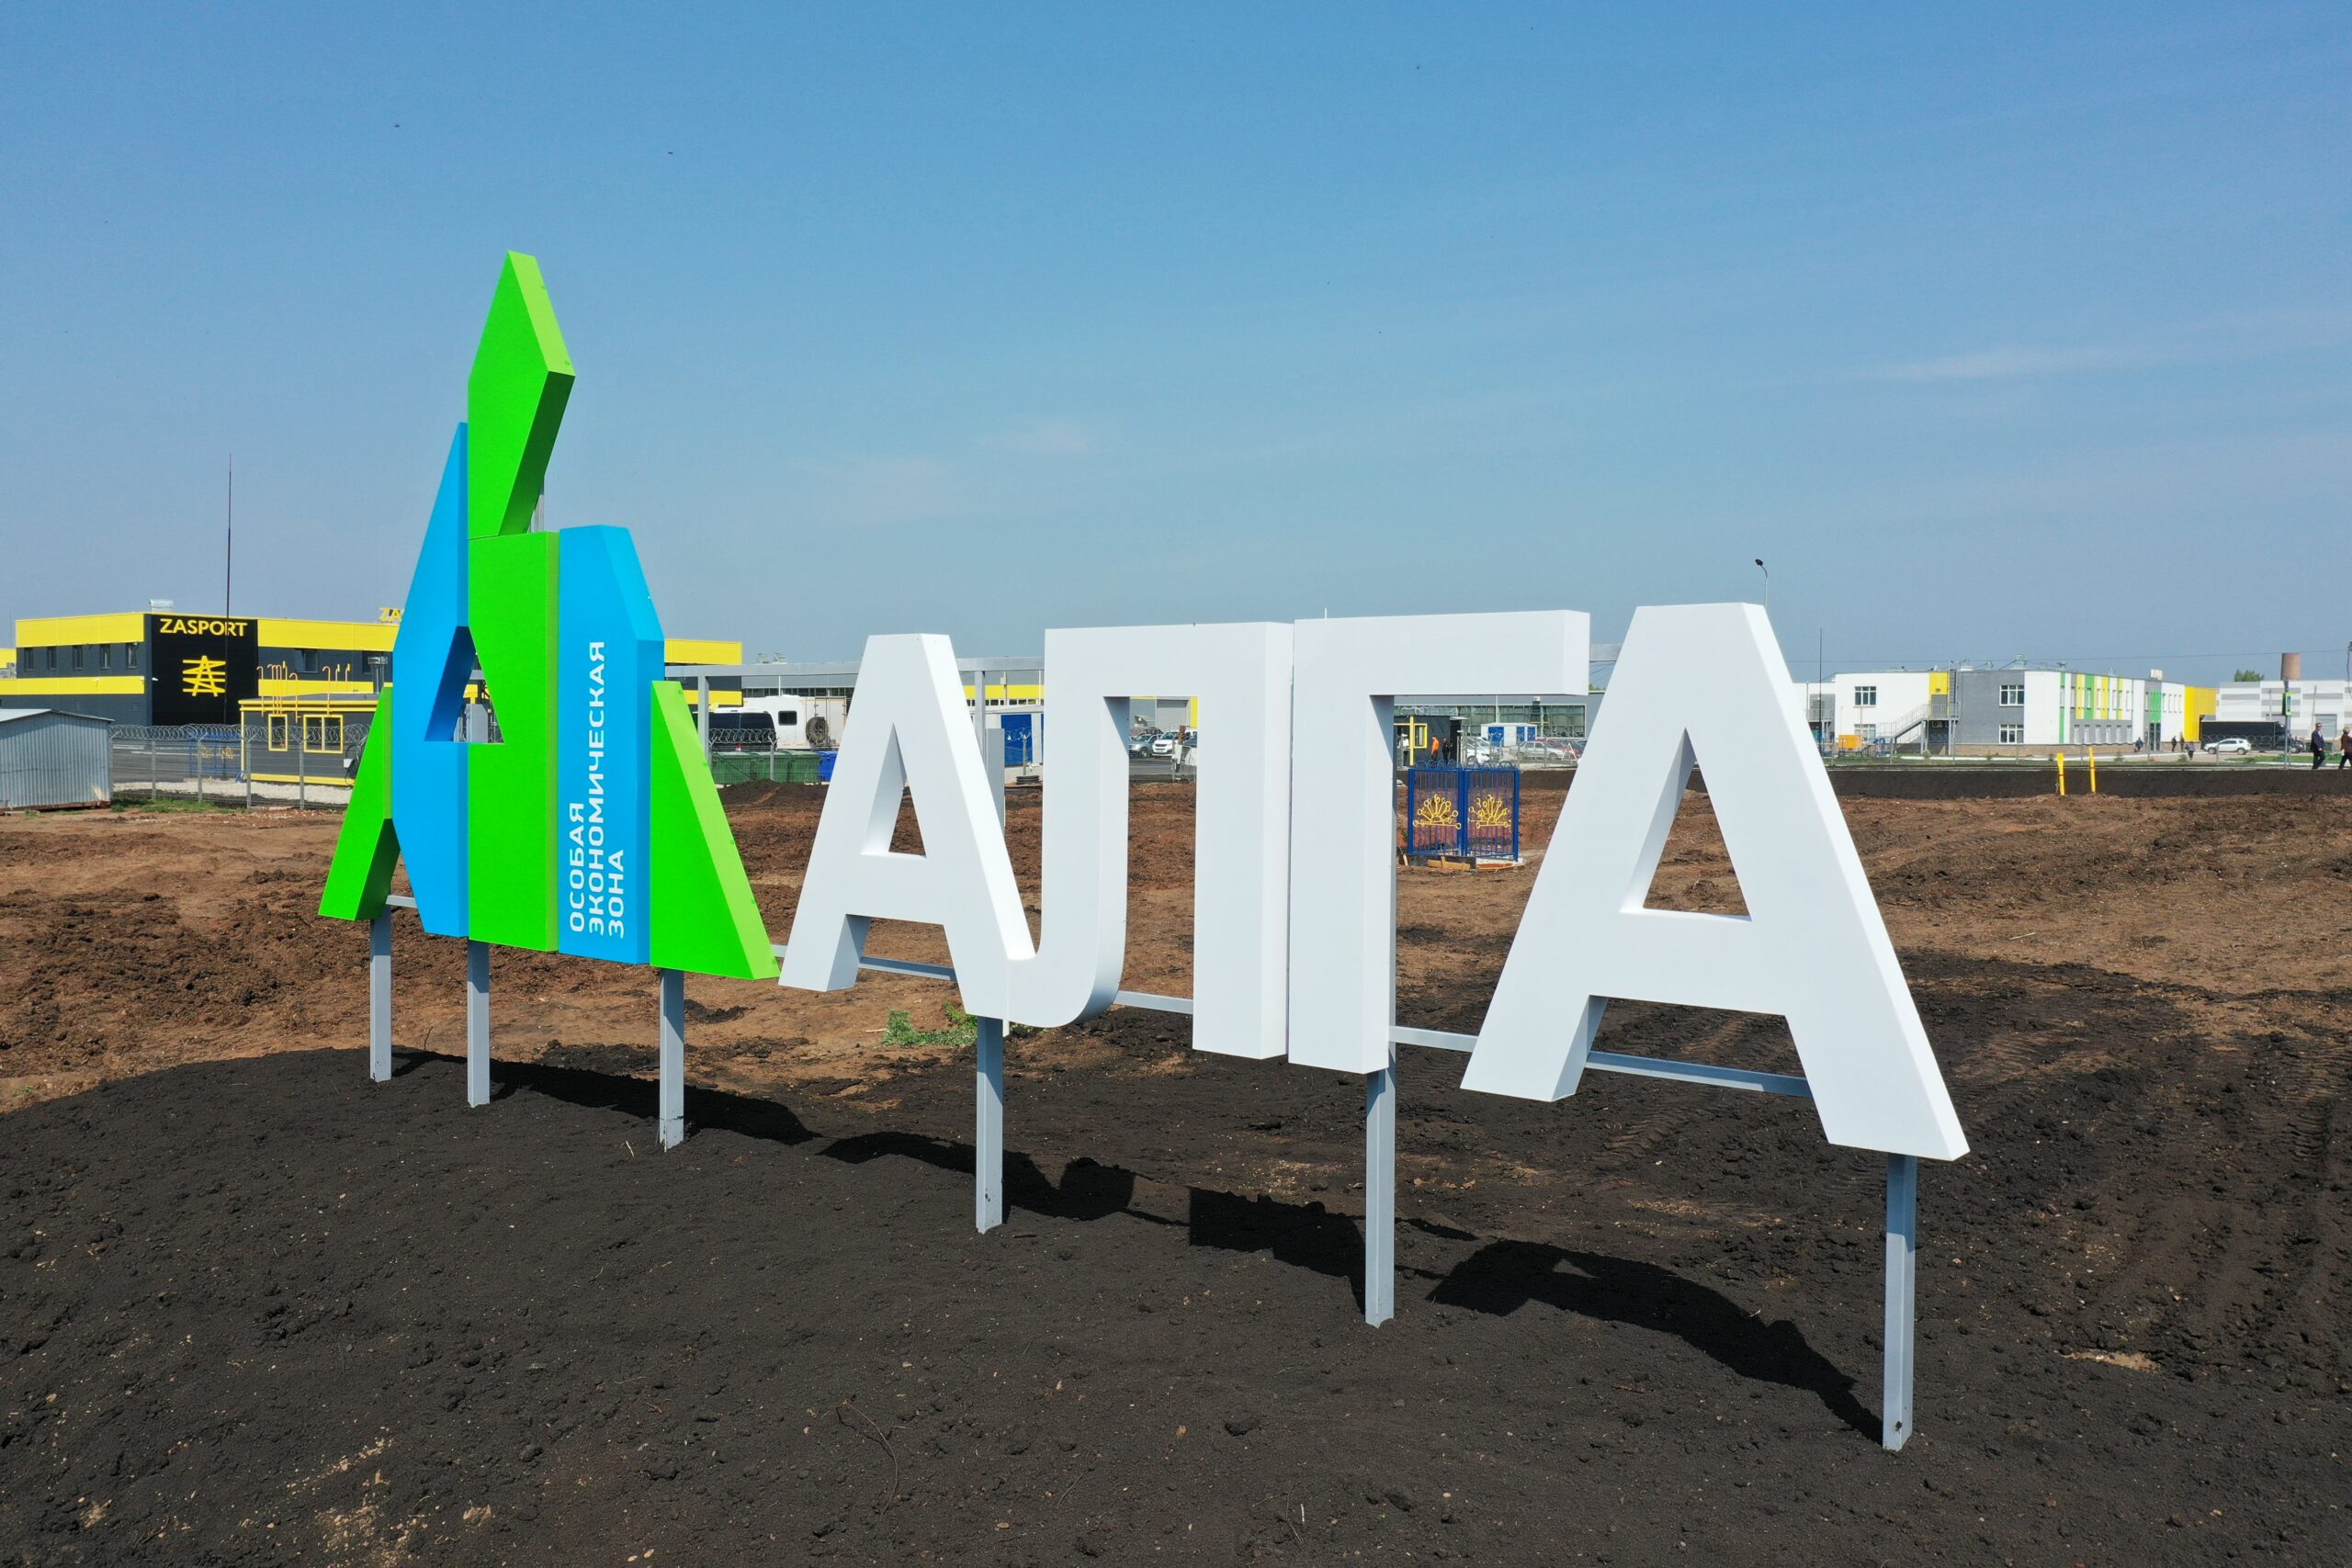 THE NUMBER OF RESIDENTS OF THE SPECIAL ECONOMIC ZONE “ALGA” INCREASED BY 67 OVER THE YEAR%